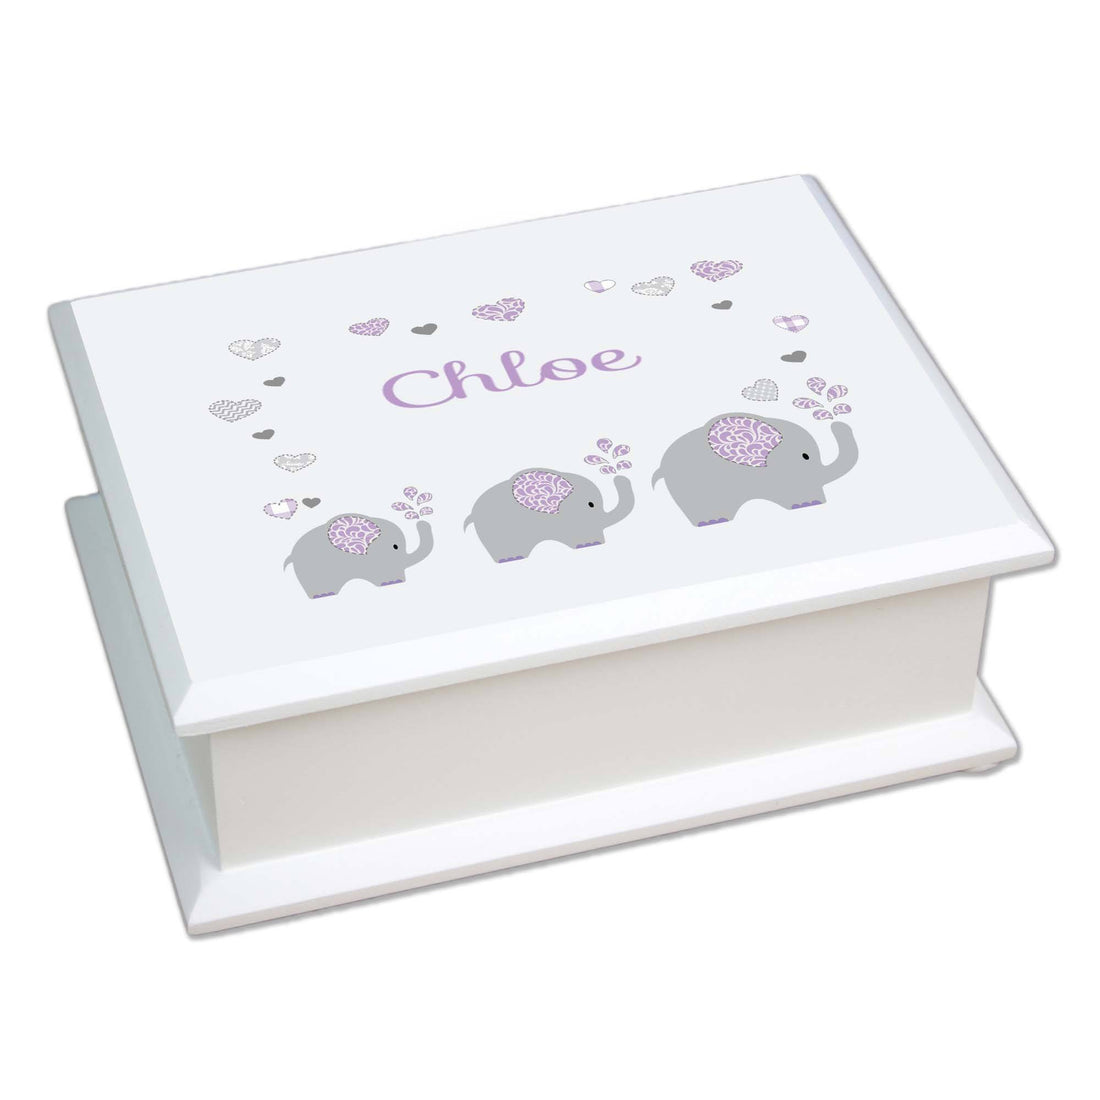 Personalized Lift Top Jewelry Box with Lavender Elephant design